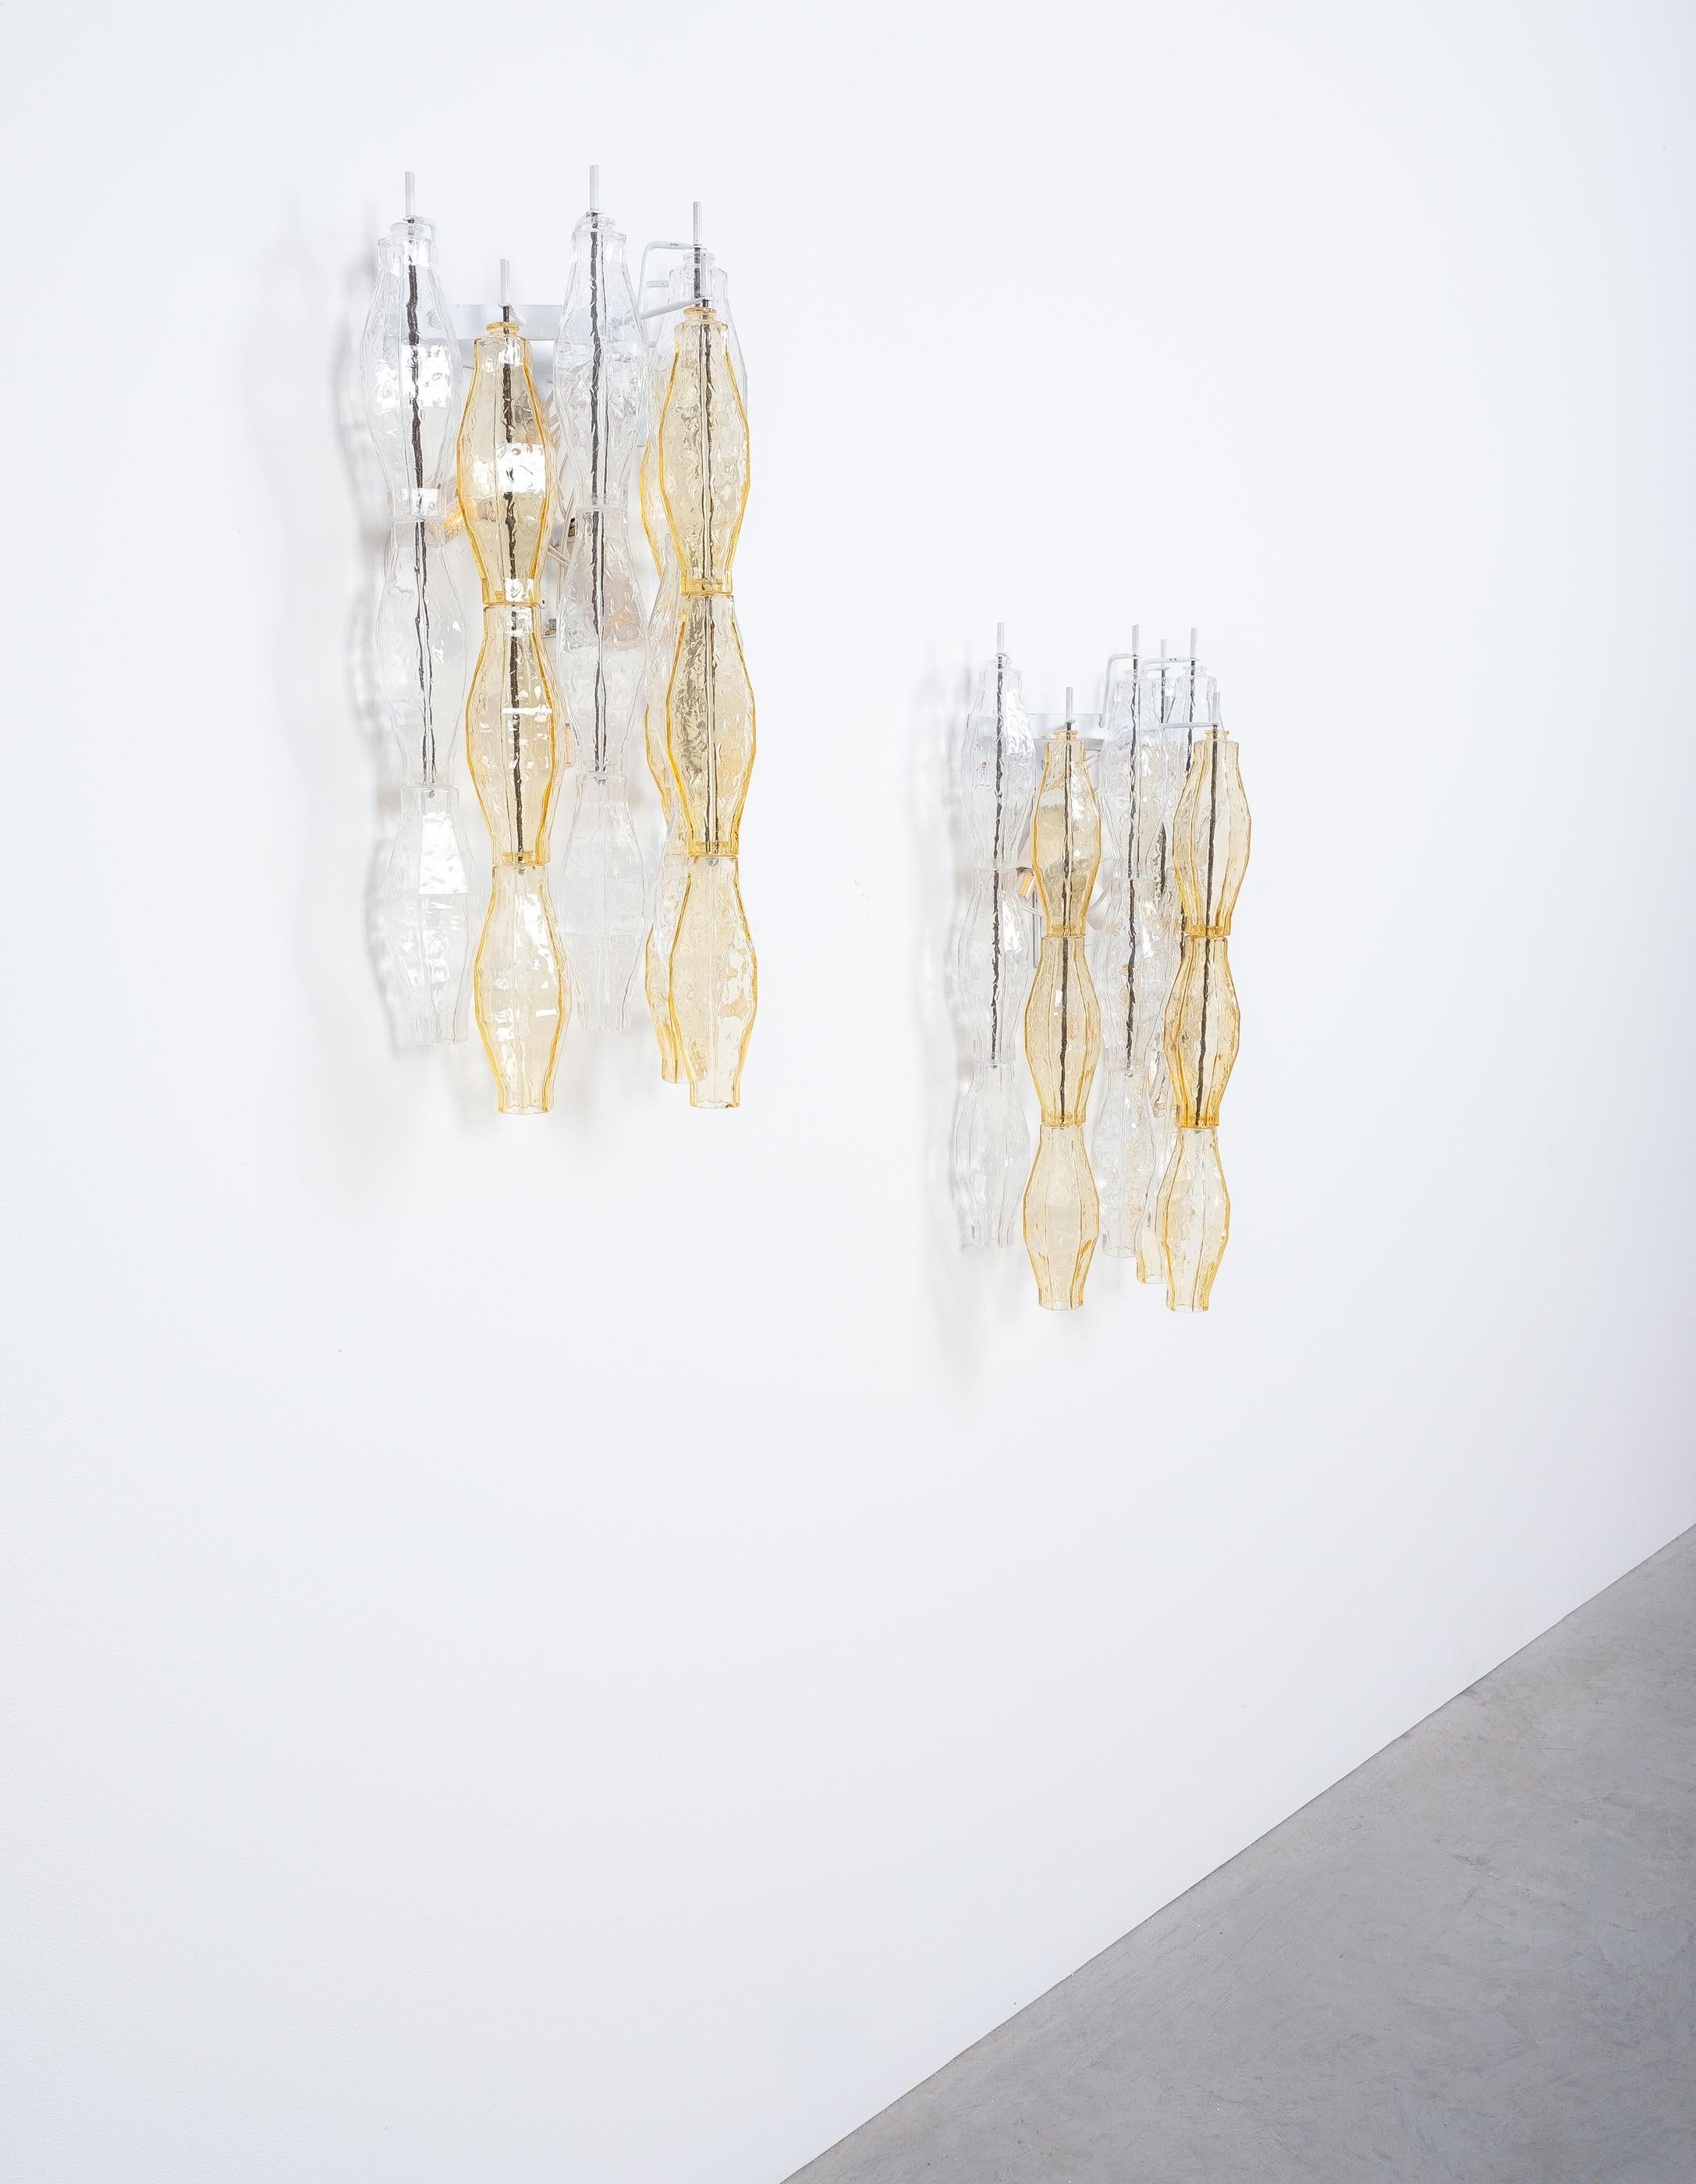 Set of 2 glass wall lamps by Carlo Scarpa for Venini, Italy, mid-century

Sold and priced individually

Impressive 22